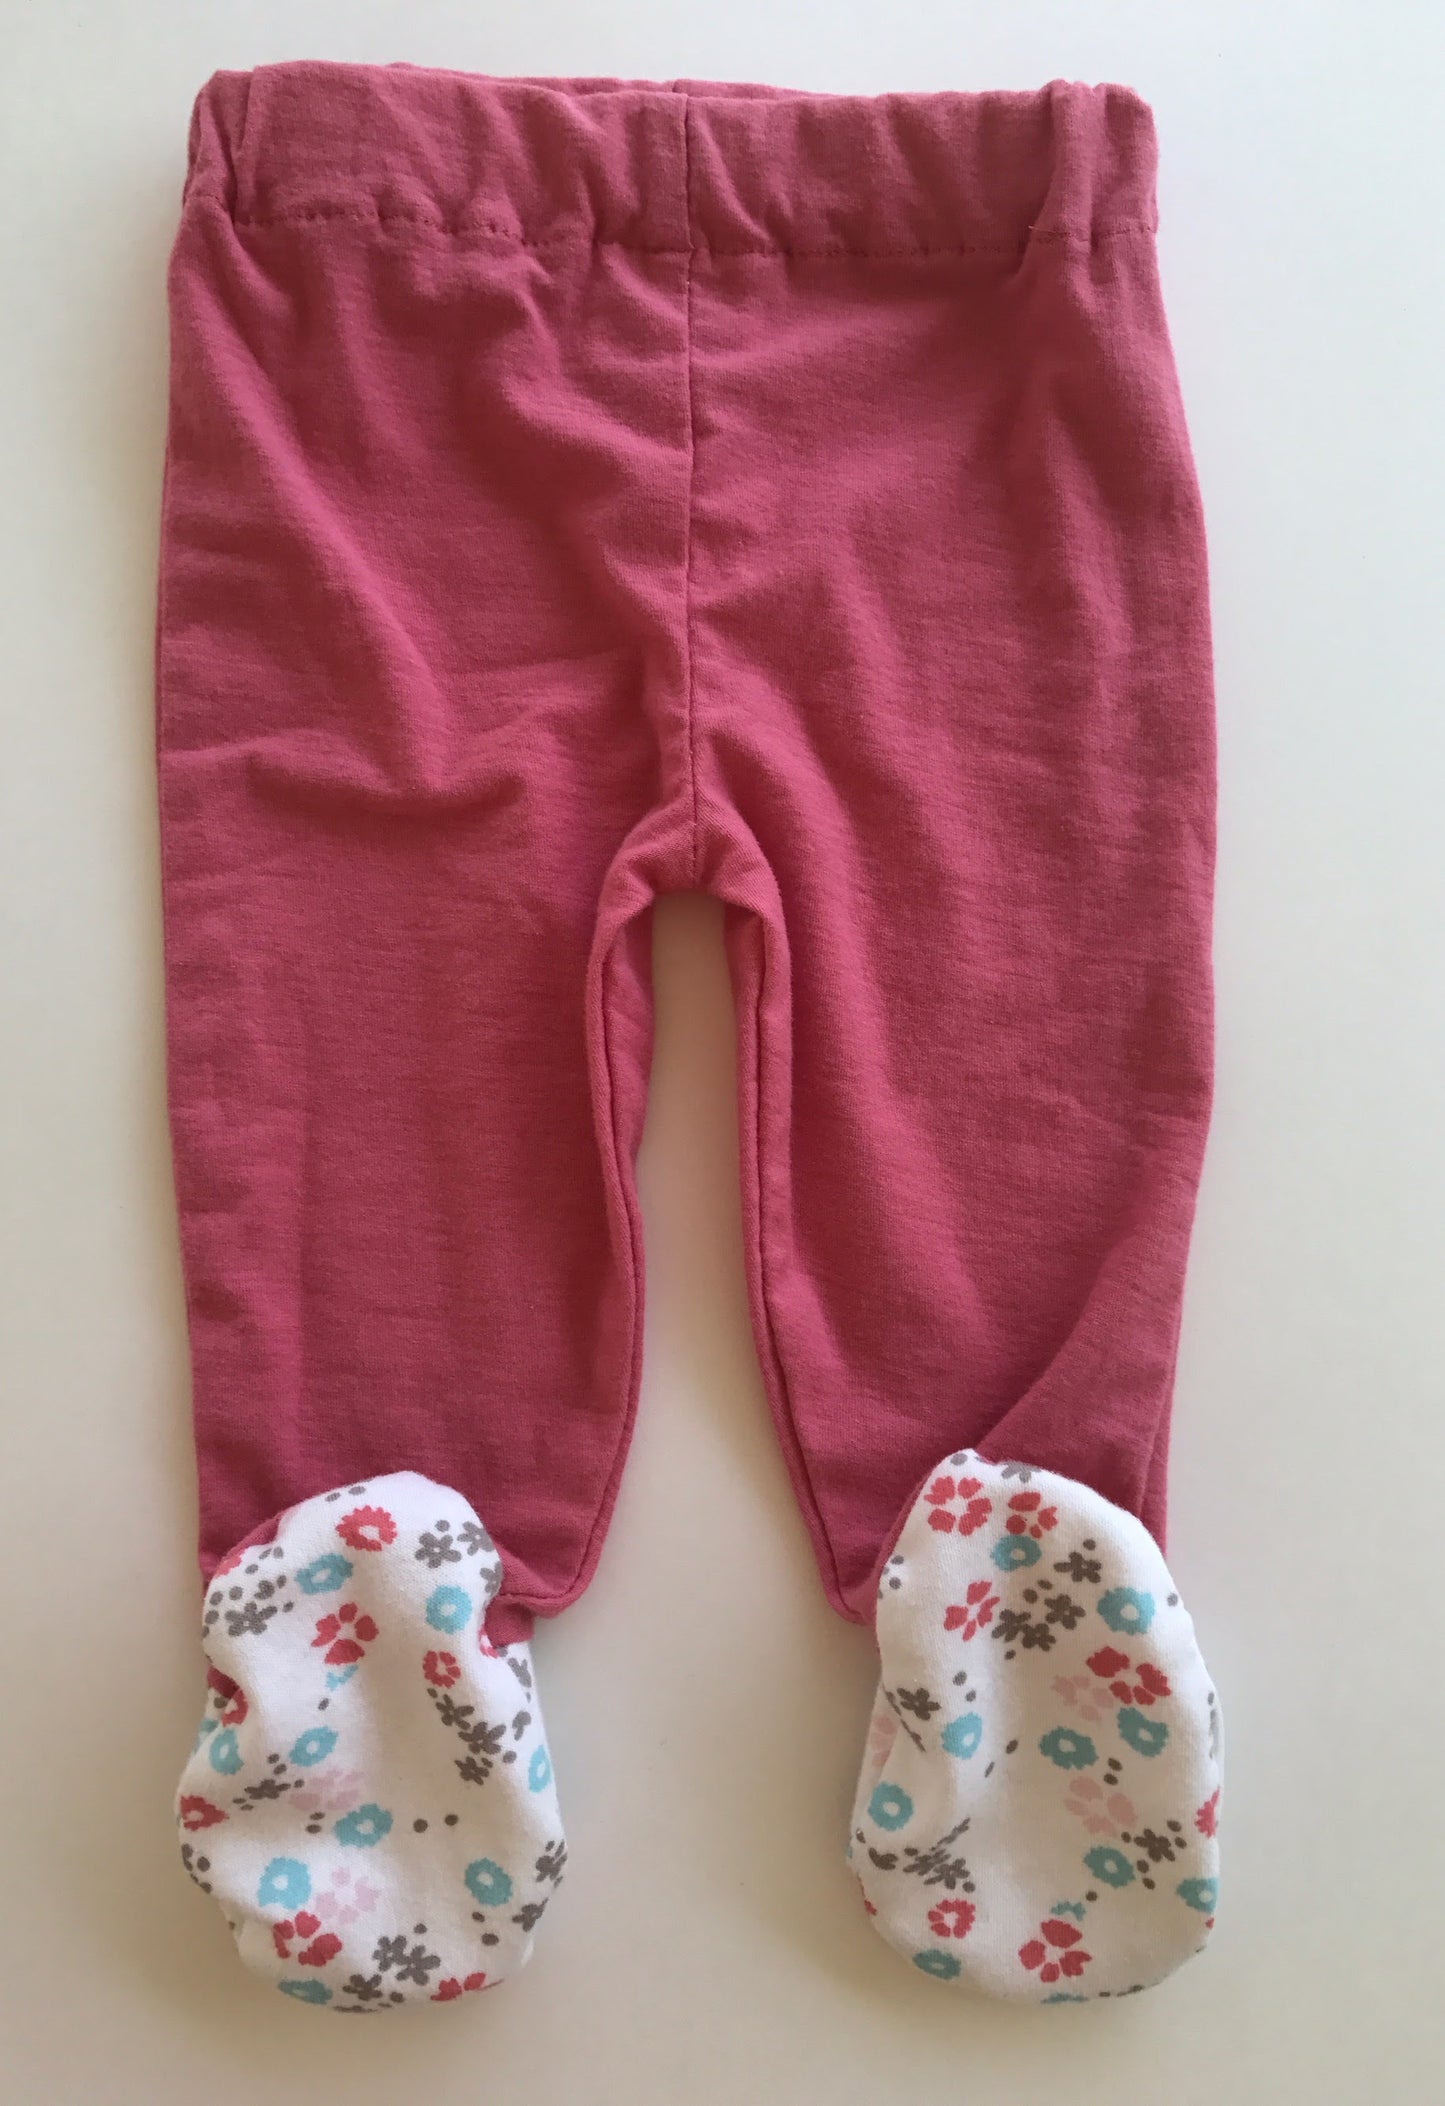 OOAK Footed Pajamas, 6M, Pajama Set, PJs with Feet, Pants with Feet, Girls Infant Sleepwear, Cotton Knit Footie Pants, Summer, Shower Gift